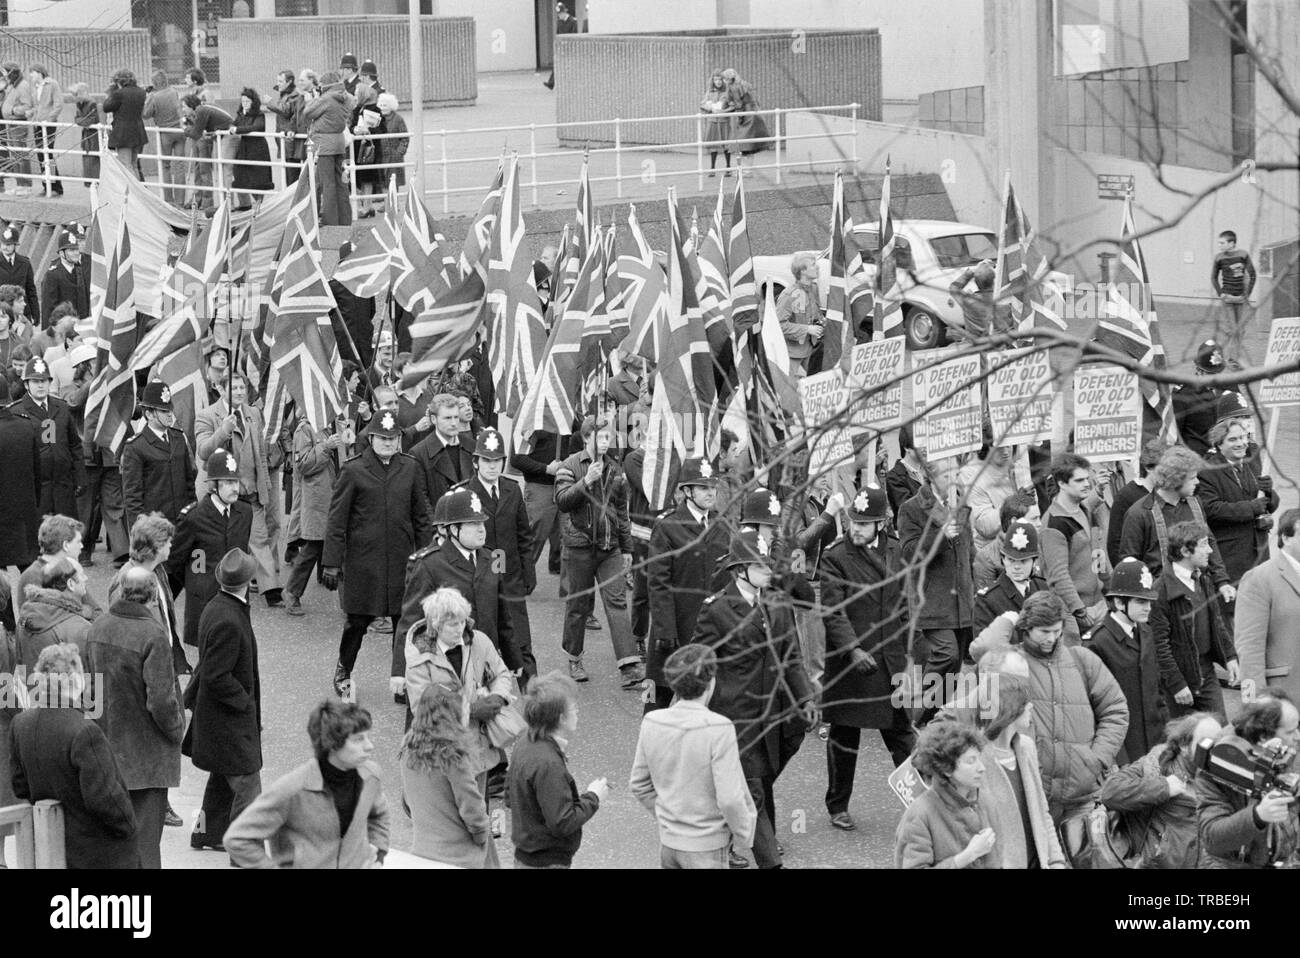 1980. A march by the National Front, a British Far Right Fascist Political Party, in Camberwell New Road, London, headed by its then leader Martin Webster. Banners proclaim 'Defend Our Old Folk' and 'Repatriate Muggers'. Stock Photo